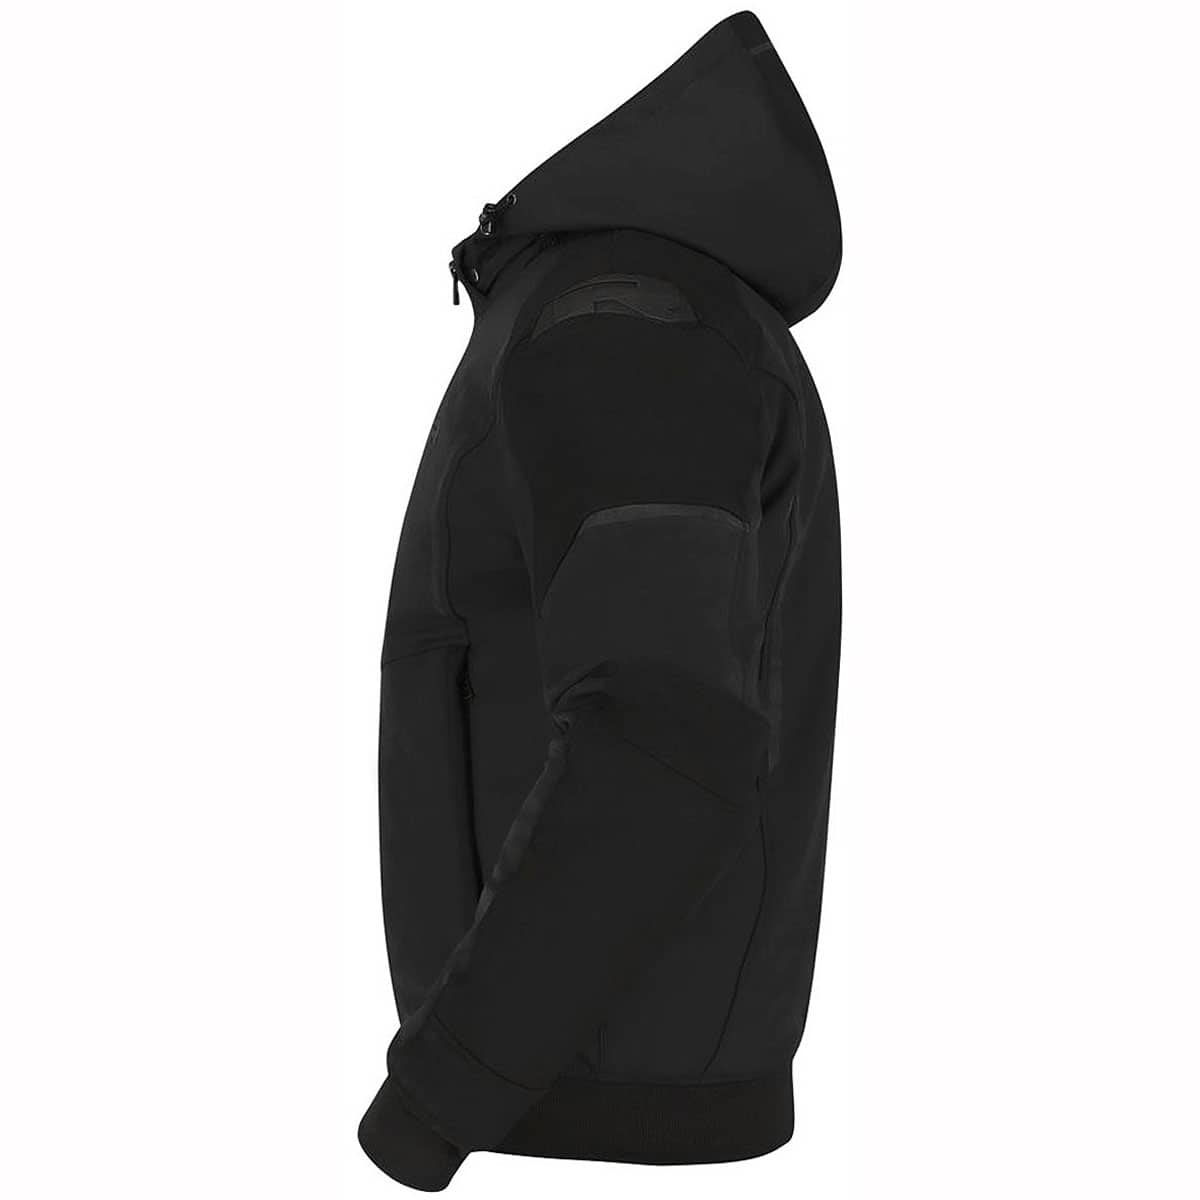 Waterproof motorcycle hoodie with a full set of D3O armour - side